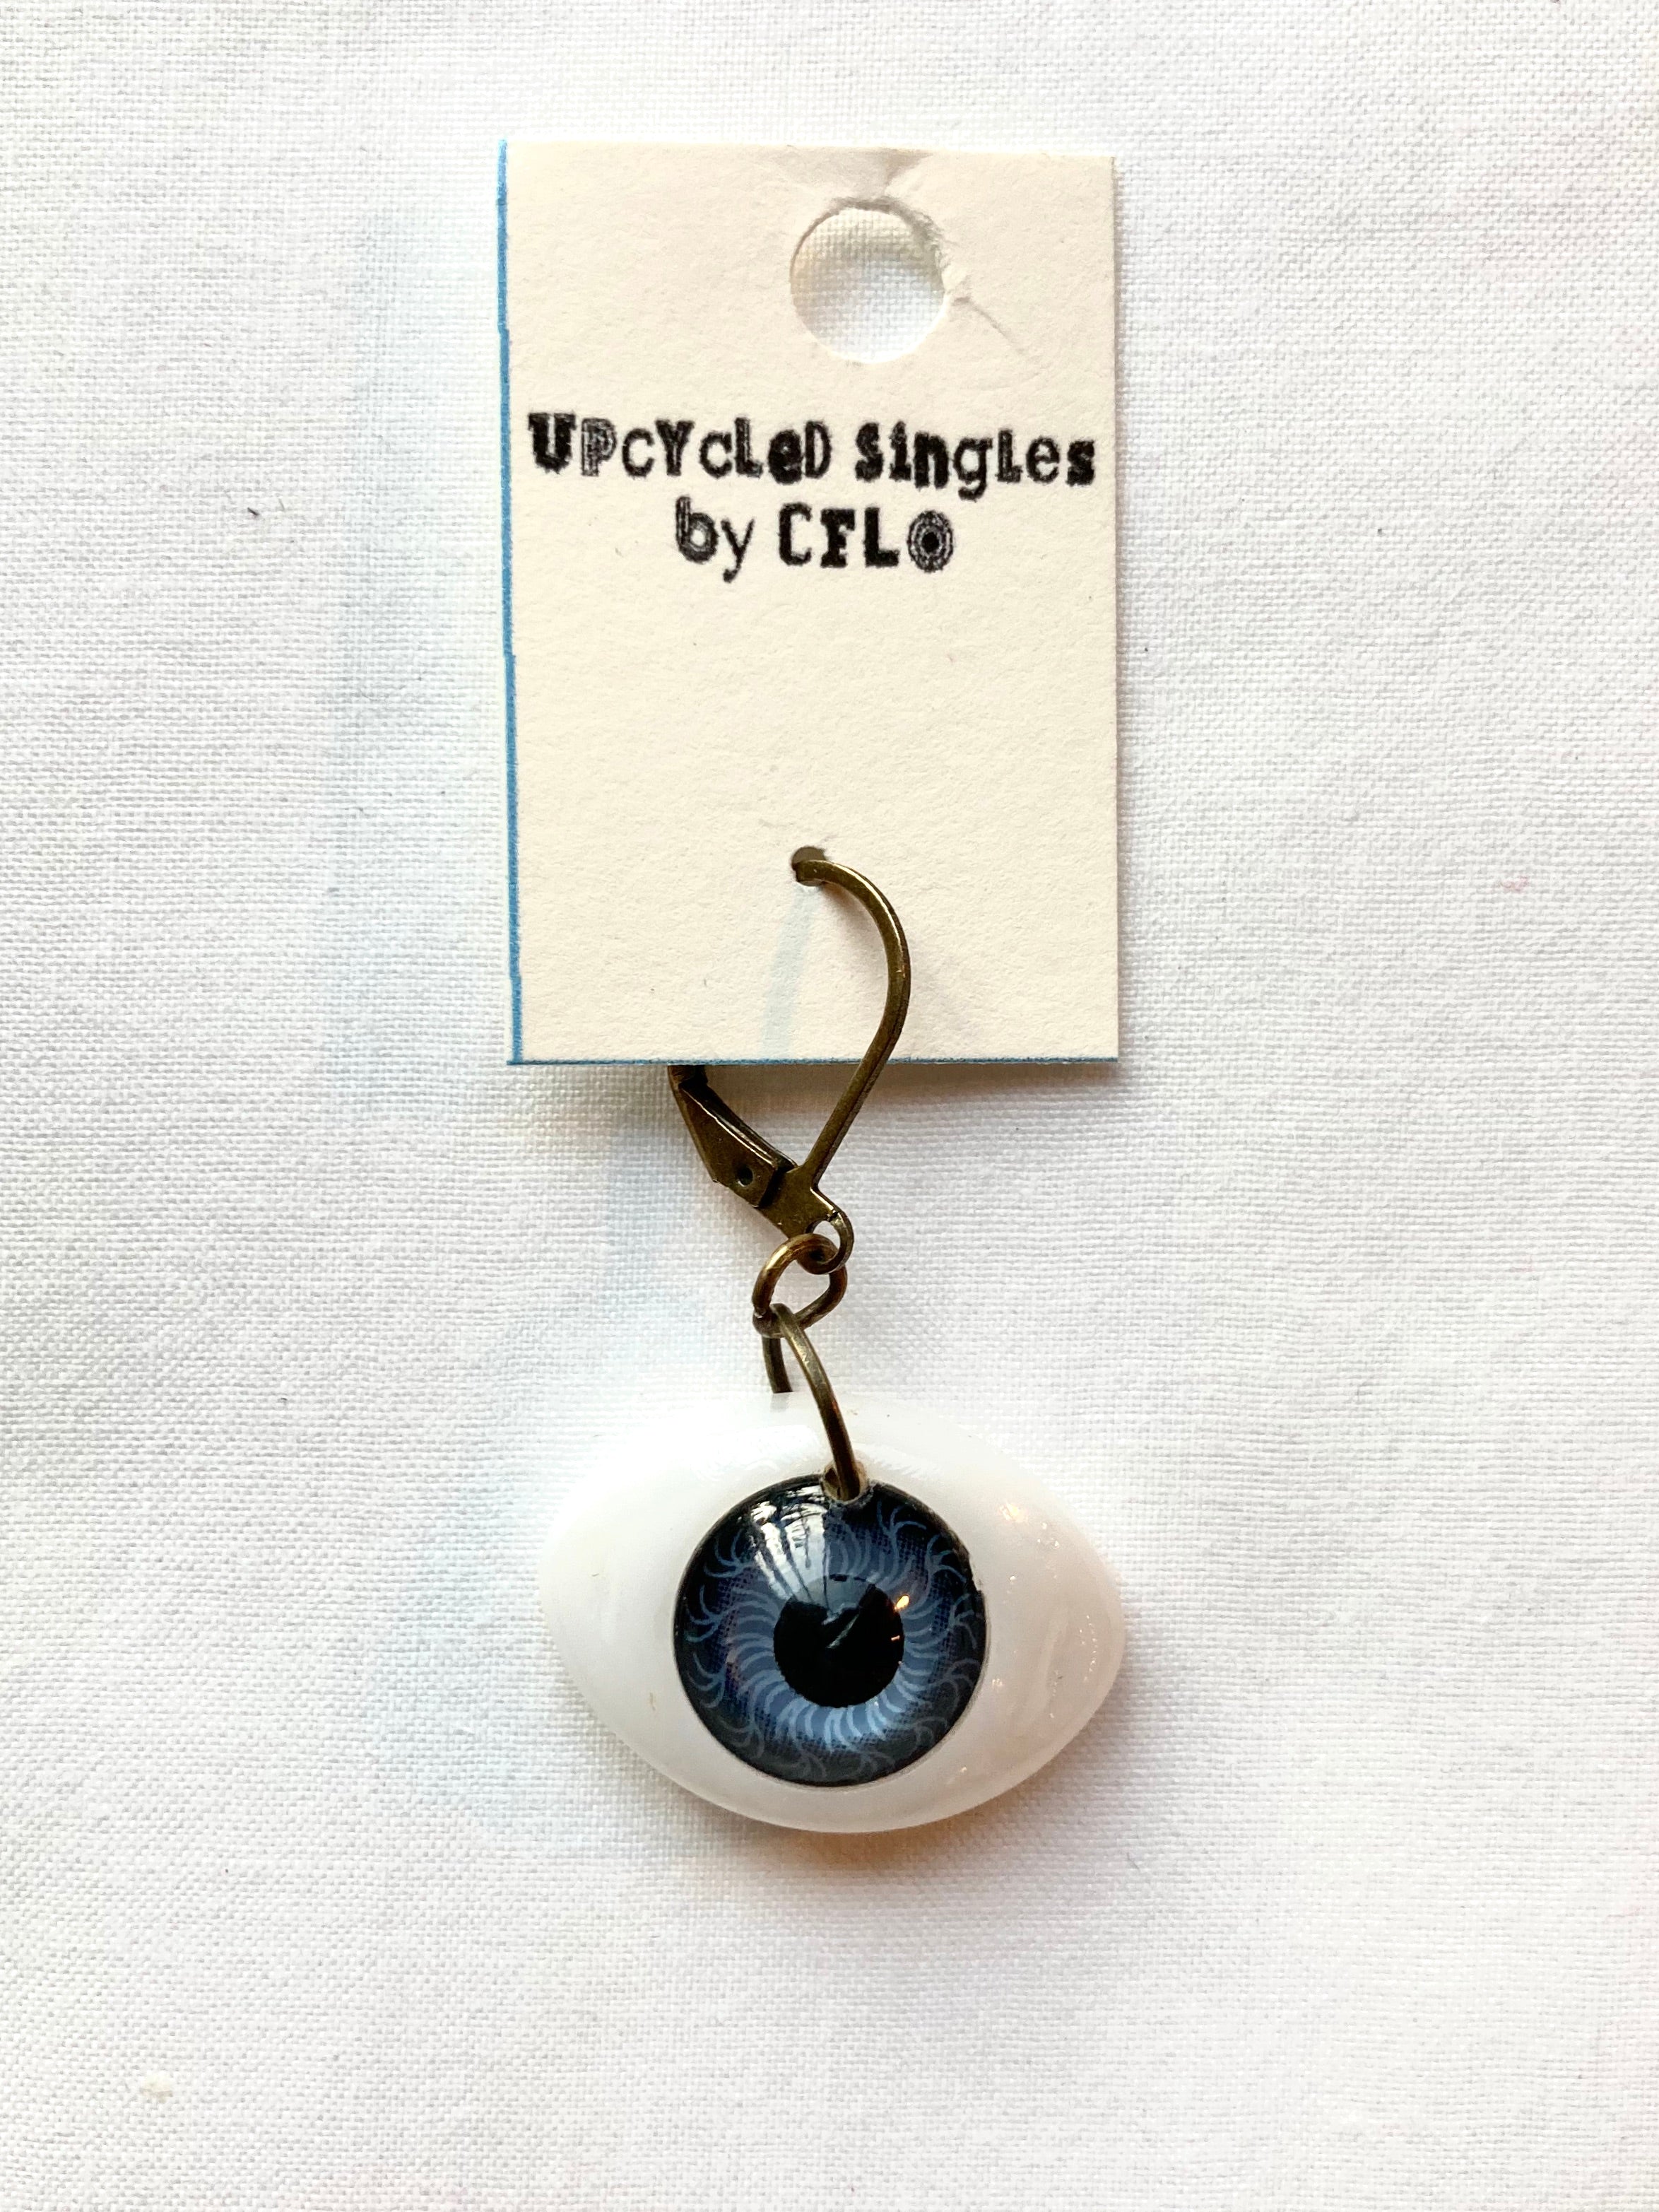 Upcycled Singles! Vintage Blue EYE Charm For Your Ears!